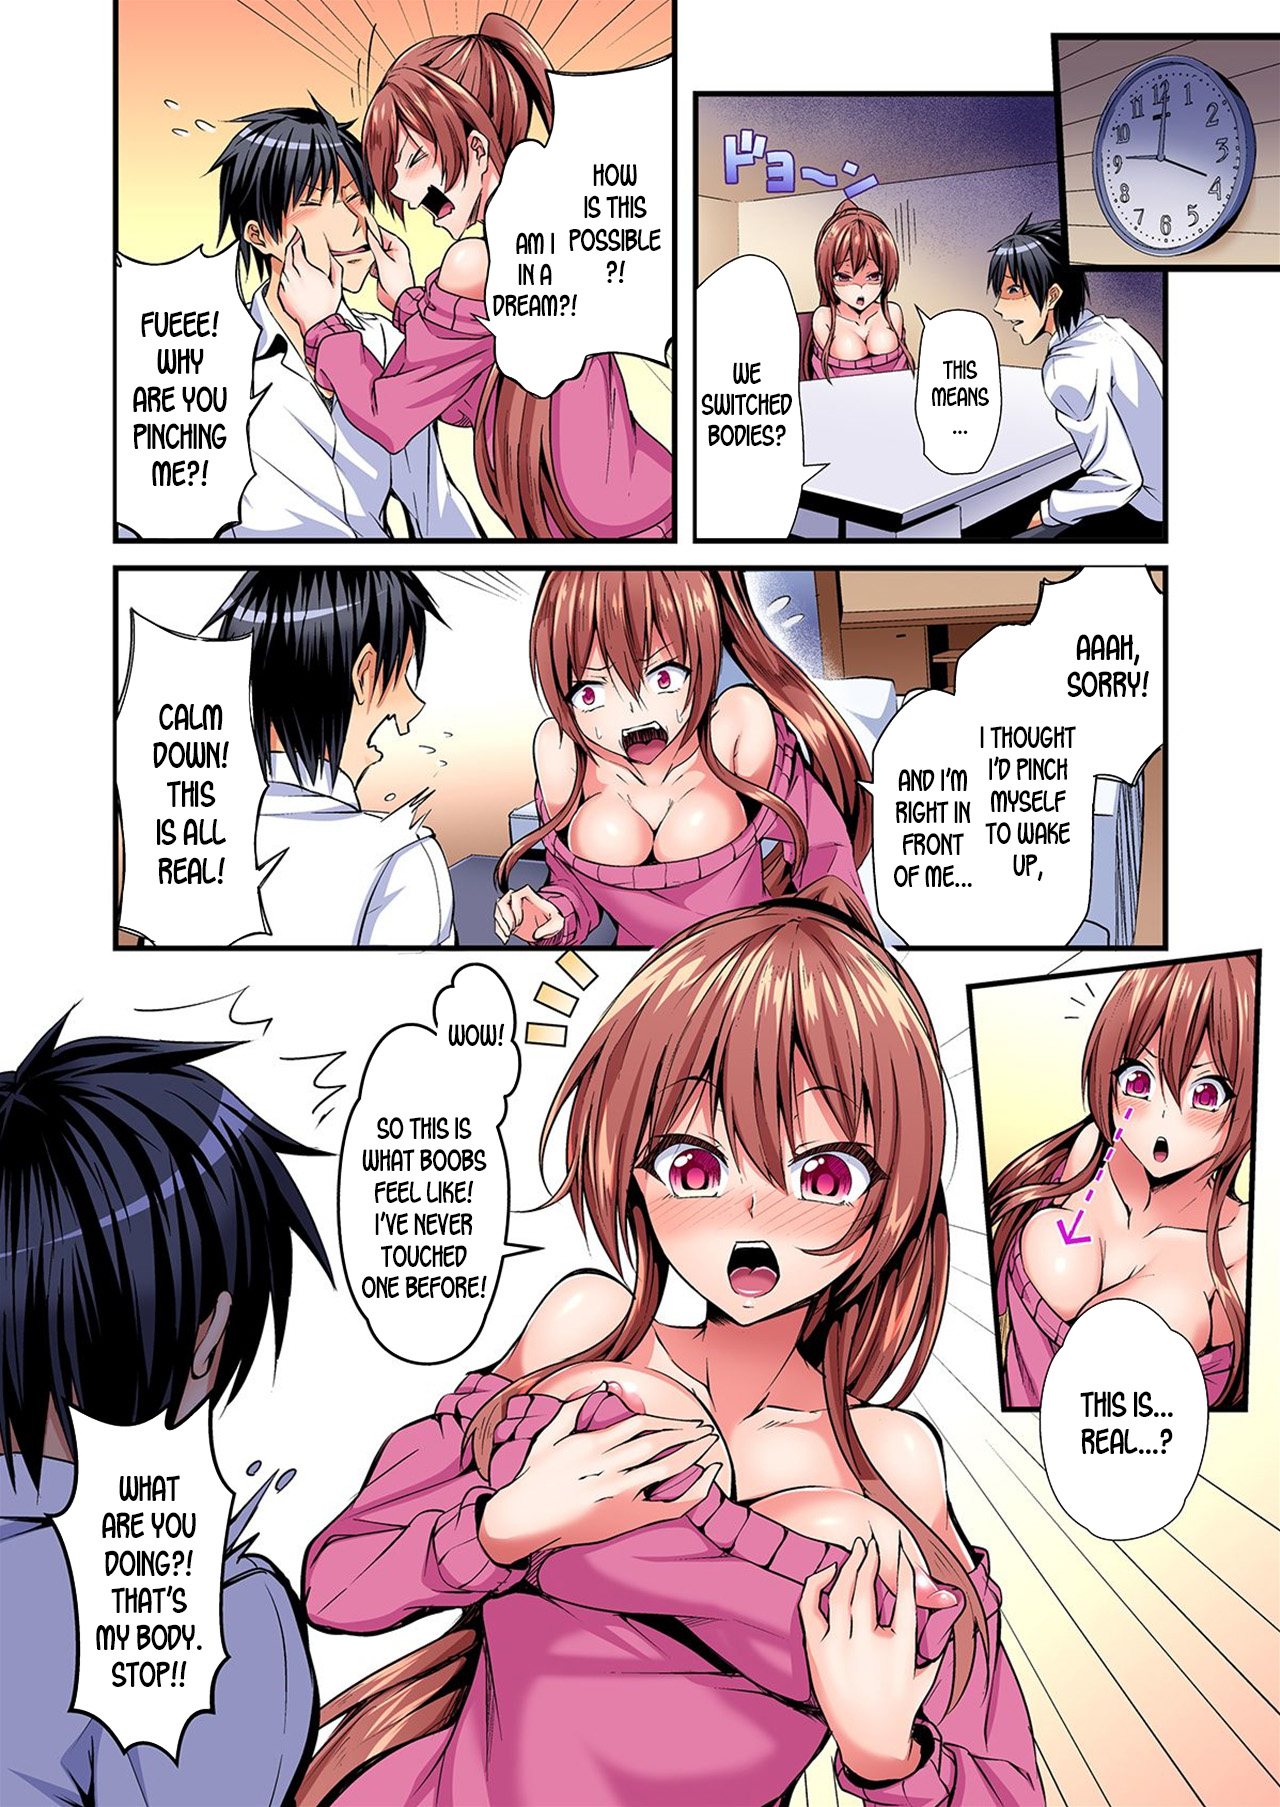 [Suishin Tenra] Switch bodies and have noisy sex! I can't stand Ayanee's sensitive body ch.1-2 [desudesu] page 7 full